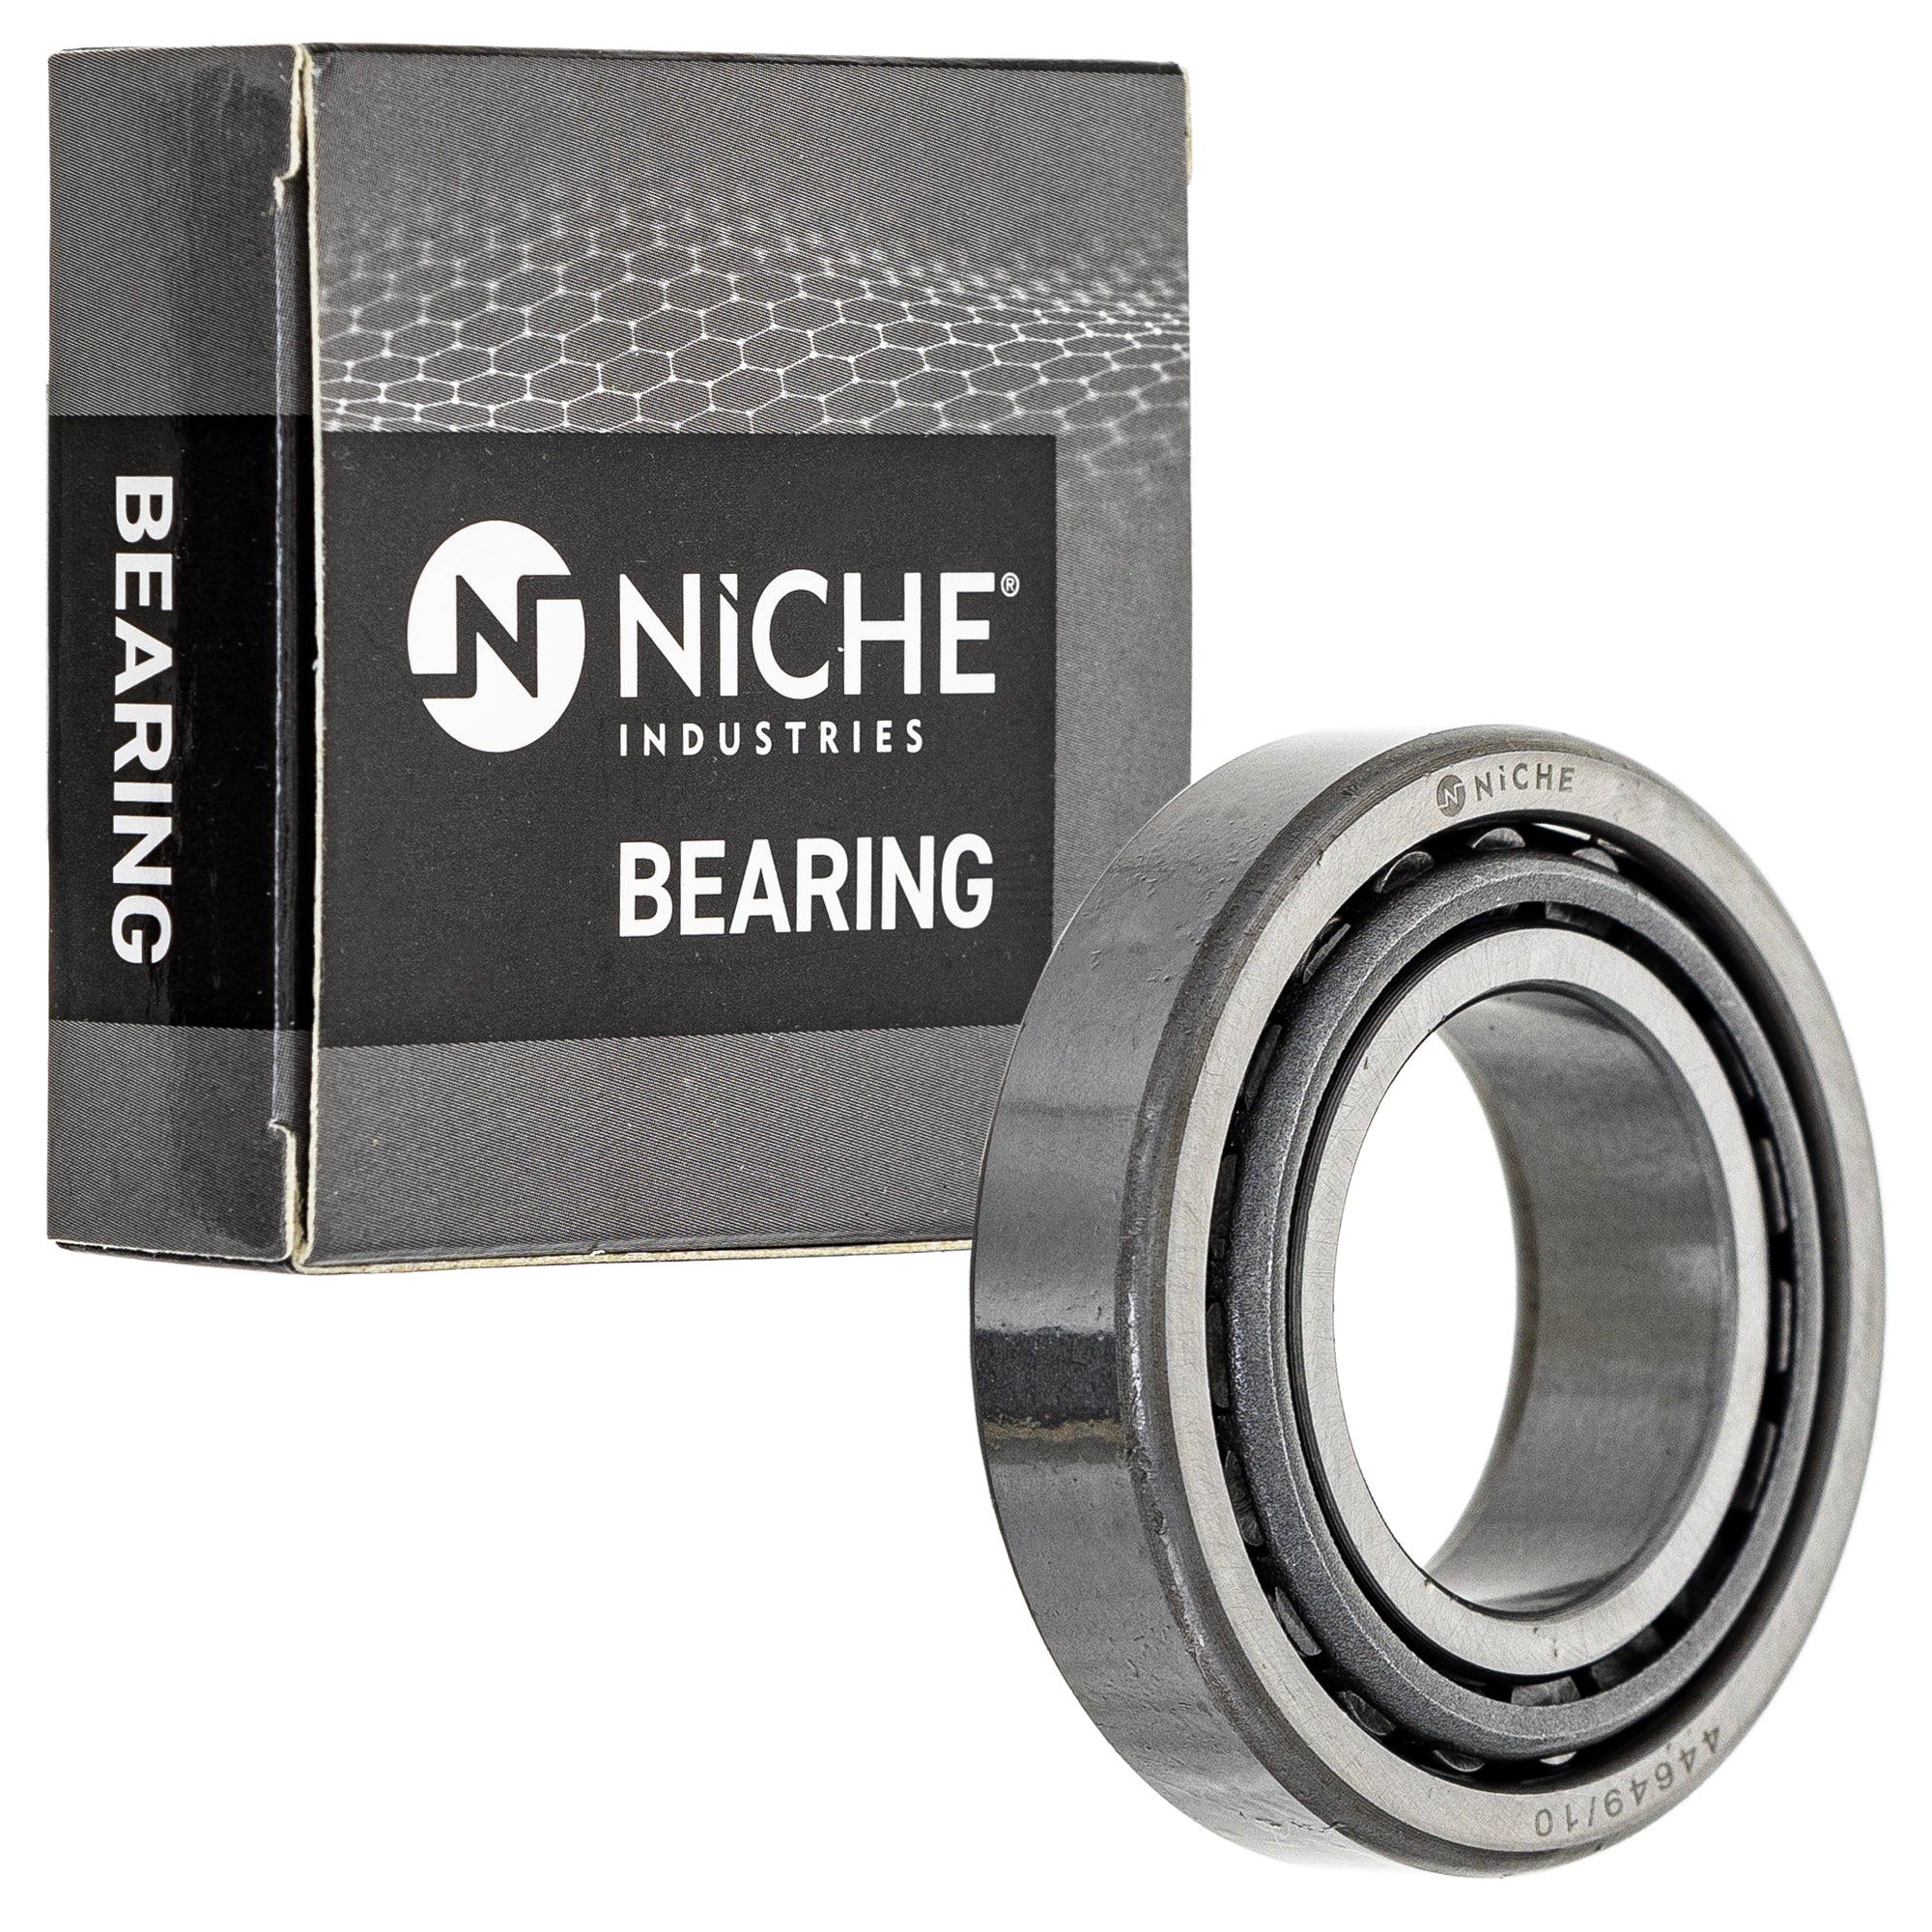 NICHE 519-CBB2268R Bearing 2-Pack for zOTHER Xpress Xplorer Xpedition